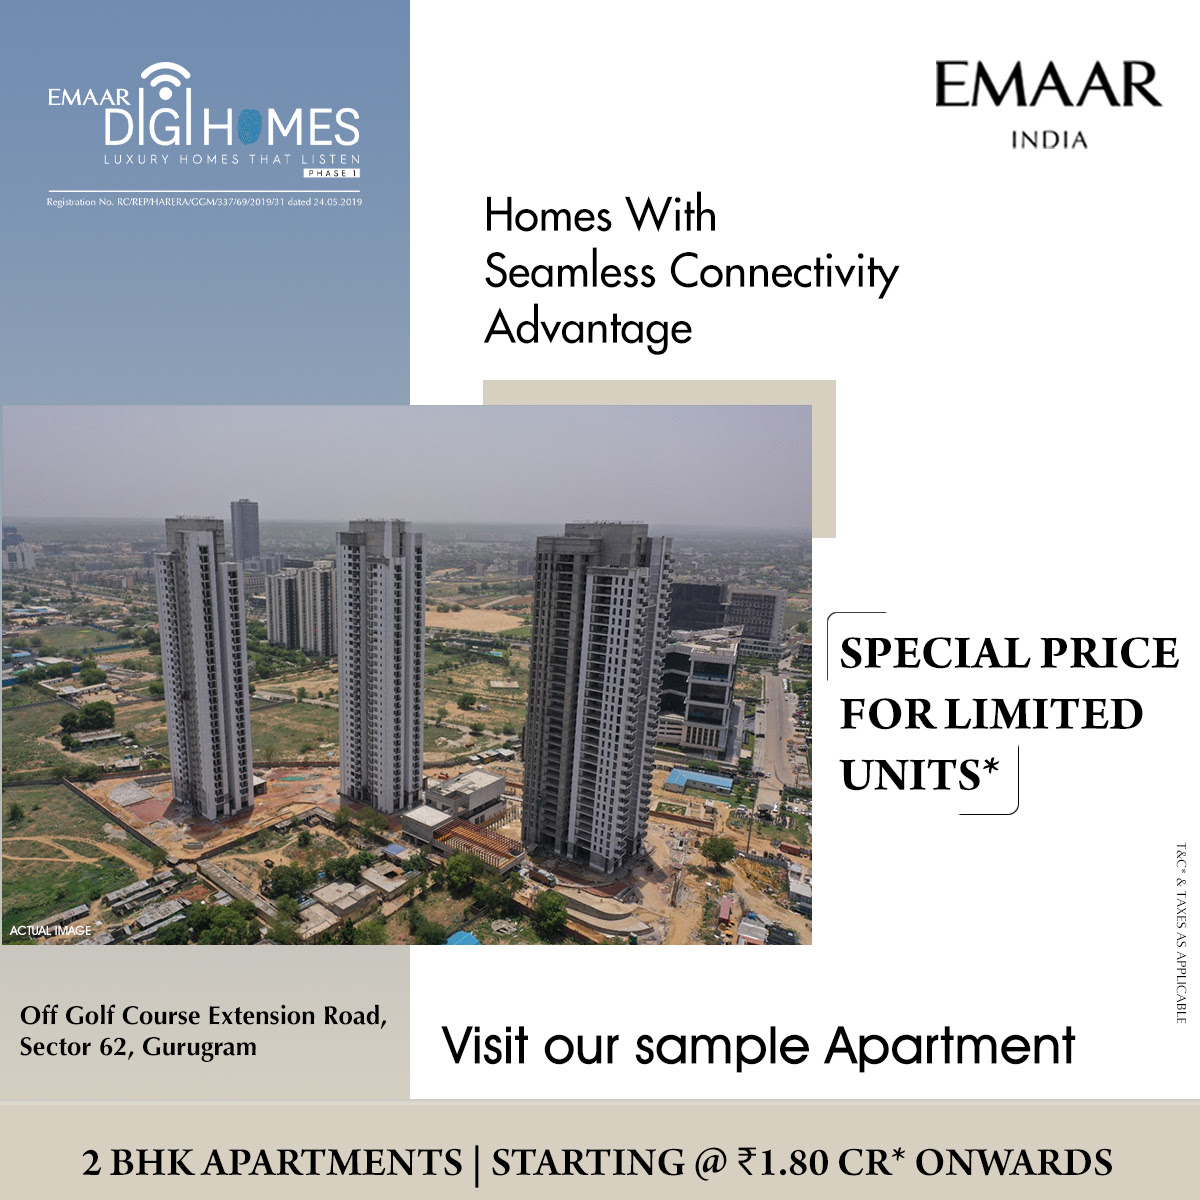 Special price for limited units at Emaar Digi Homes in Sector 62, Gurgaon